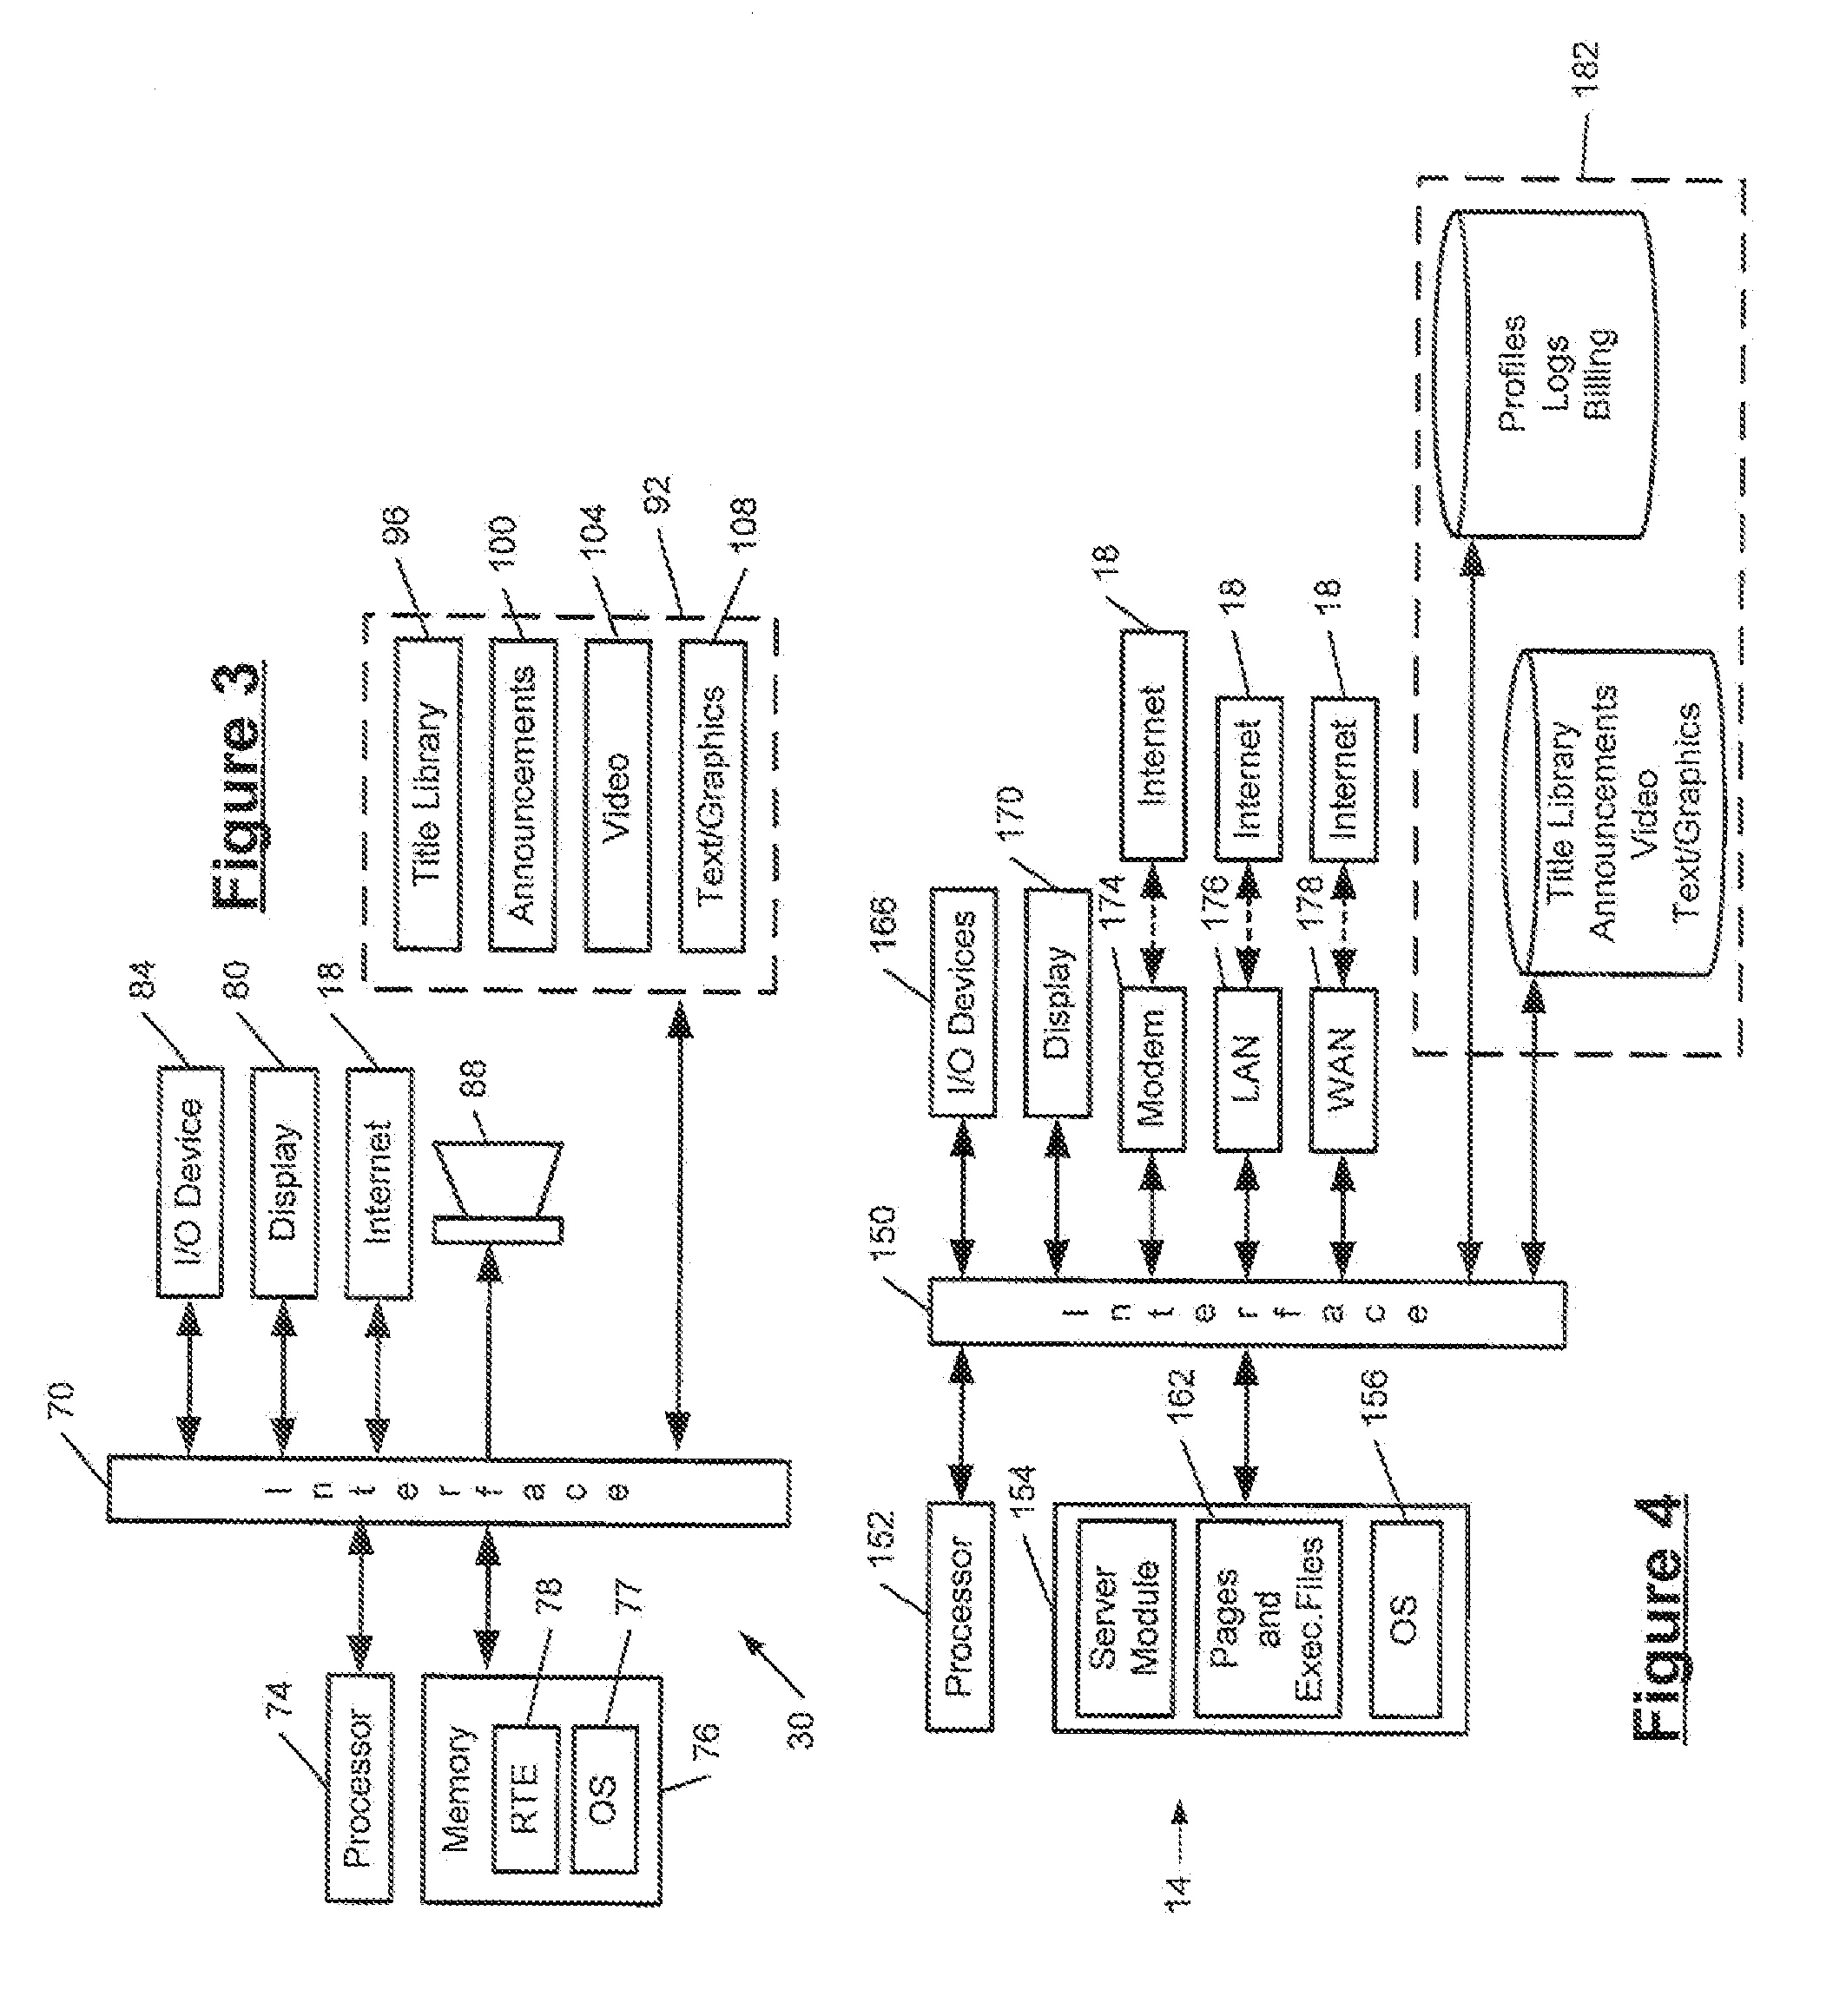 Distributed control for a continuous play background music system